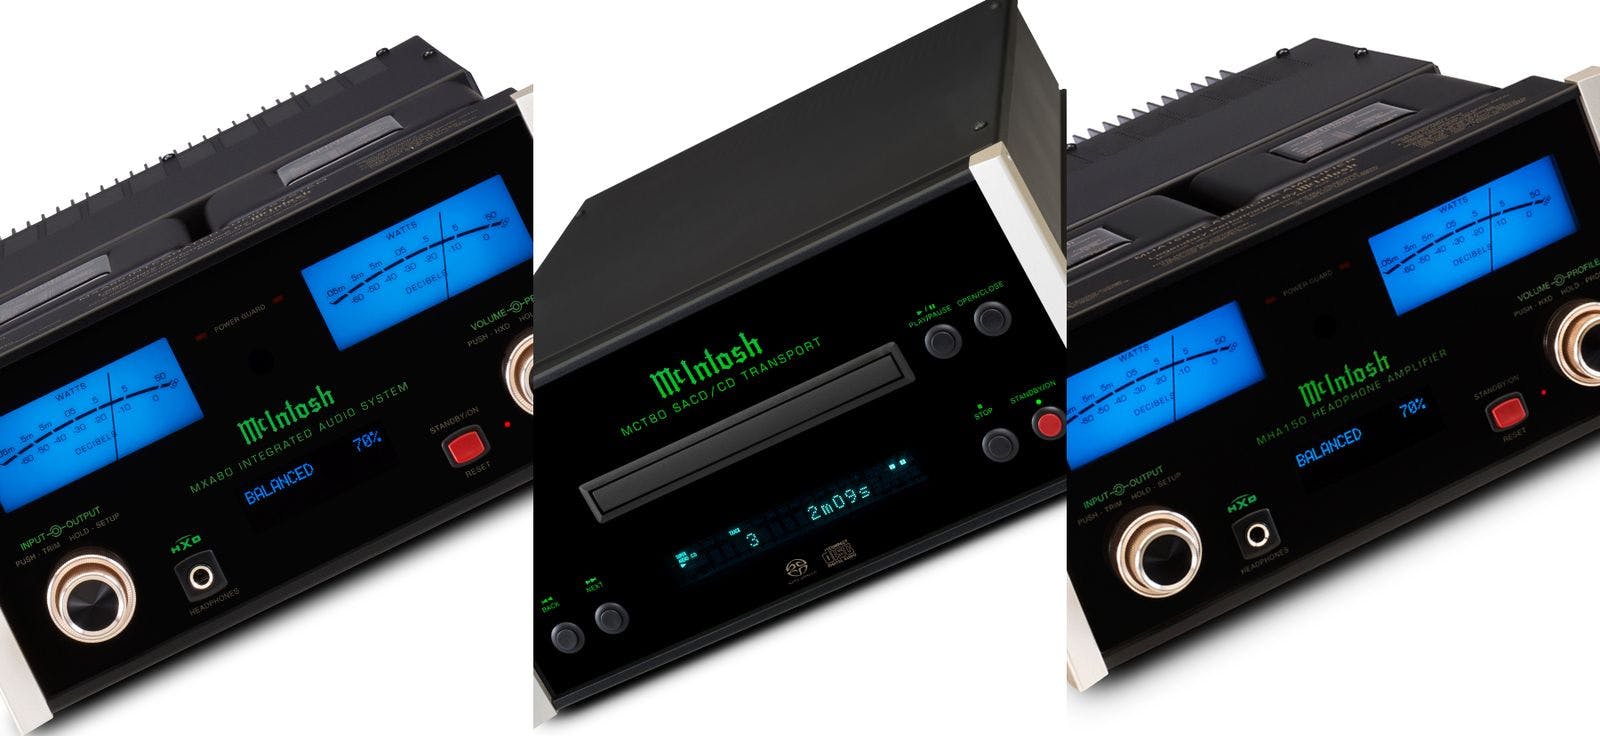 The McIntosh MXA80, MHA150, and MCT80 are all now discontinued﻿